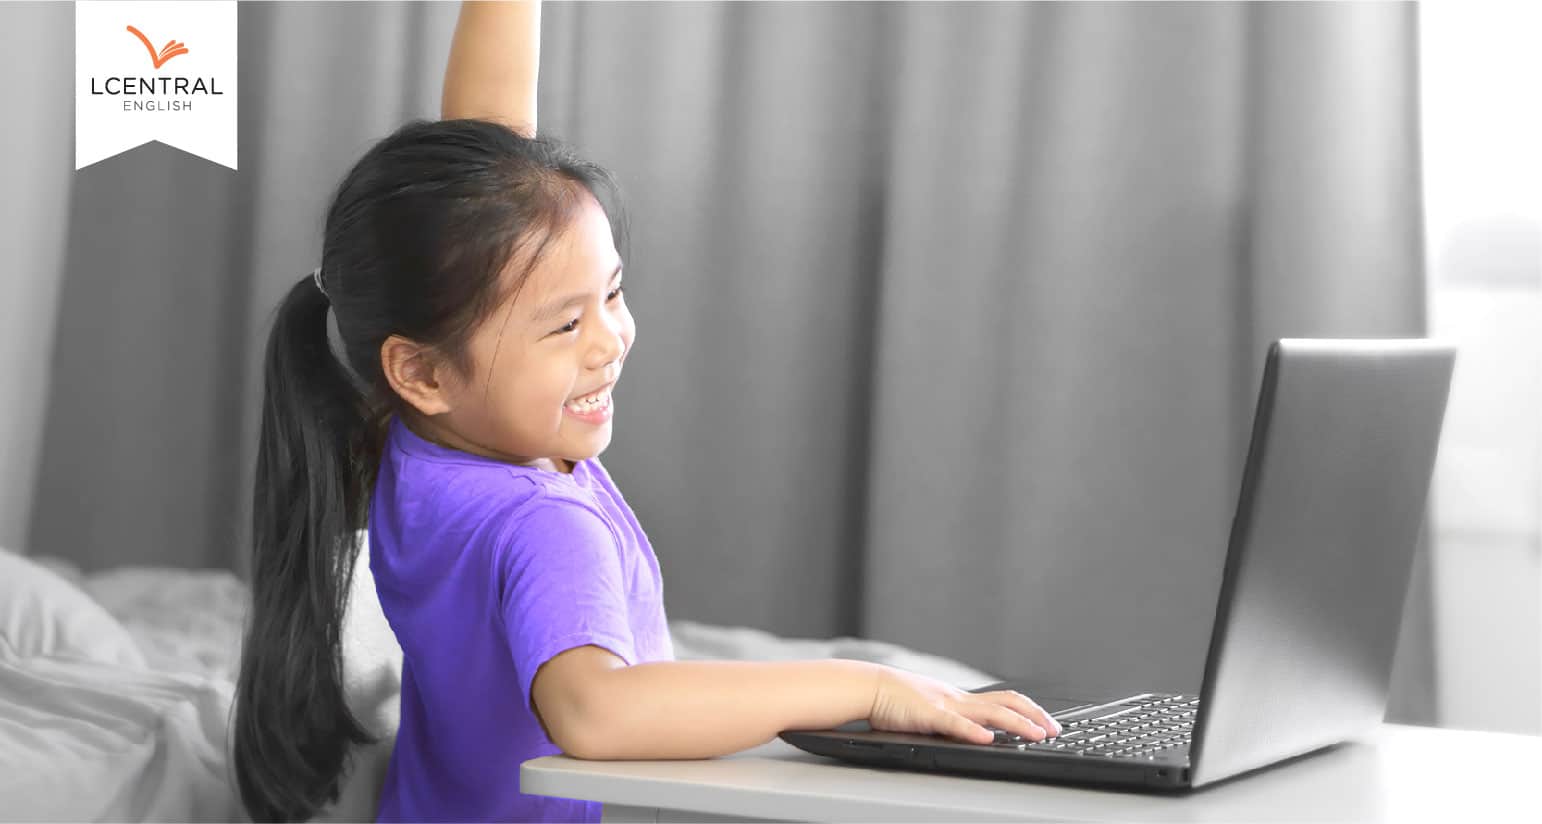  LCentral English Enrichment Tuition Singapore Getting the most out of screen time Context